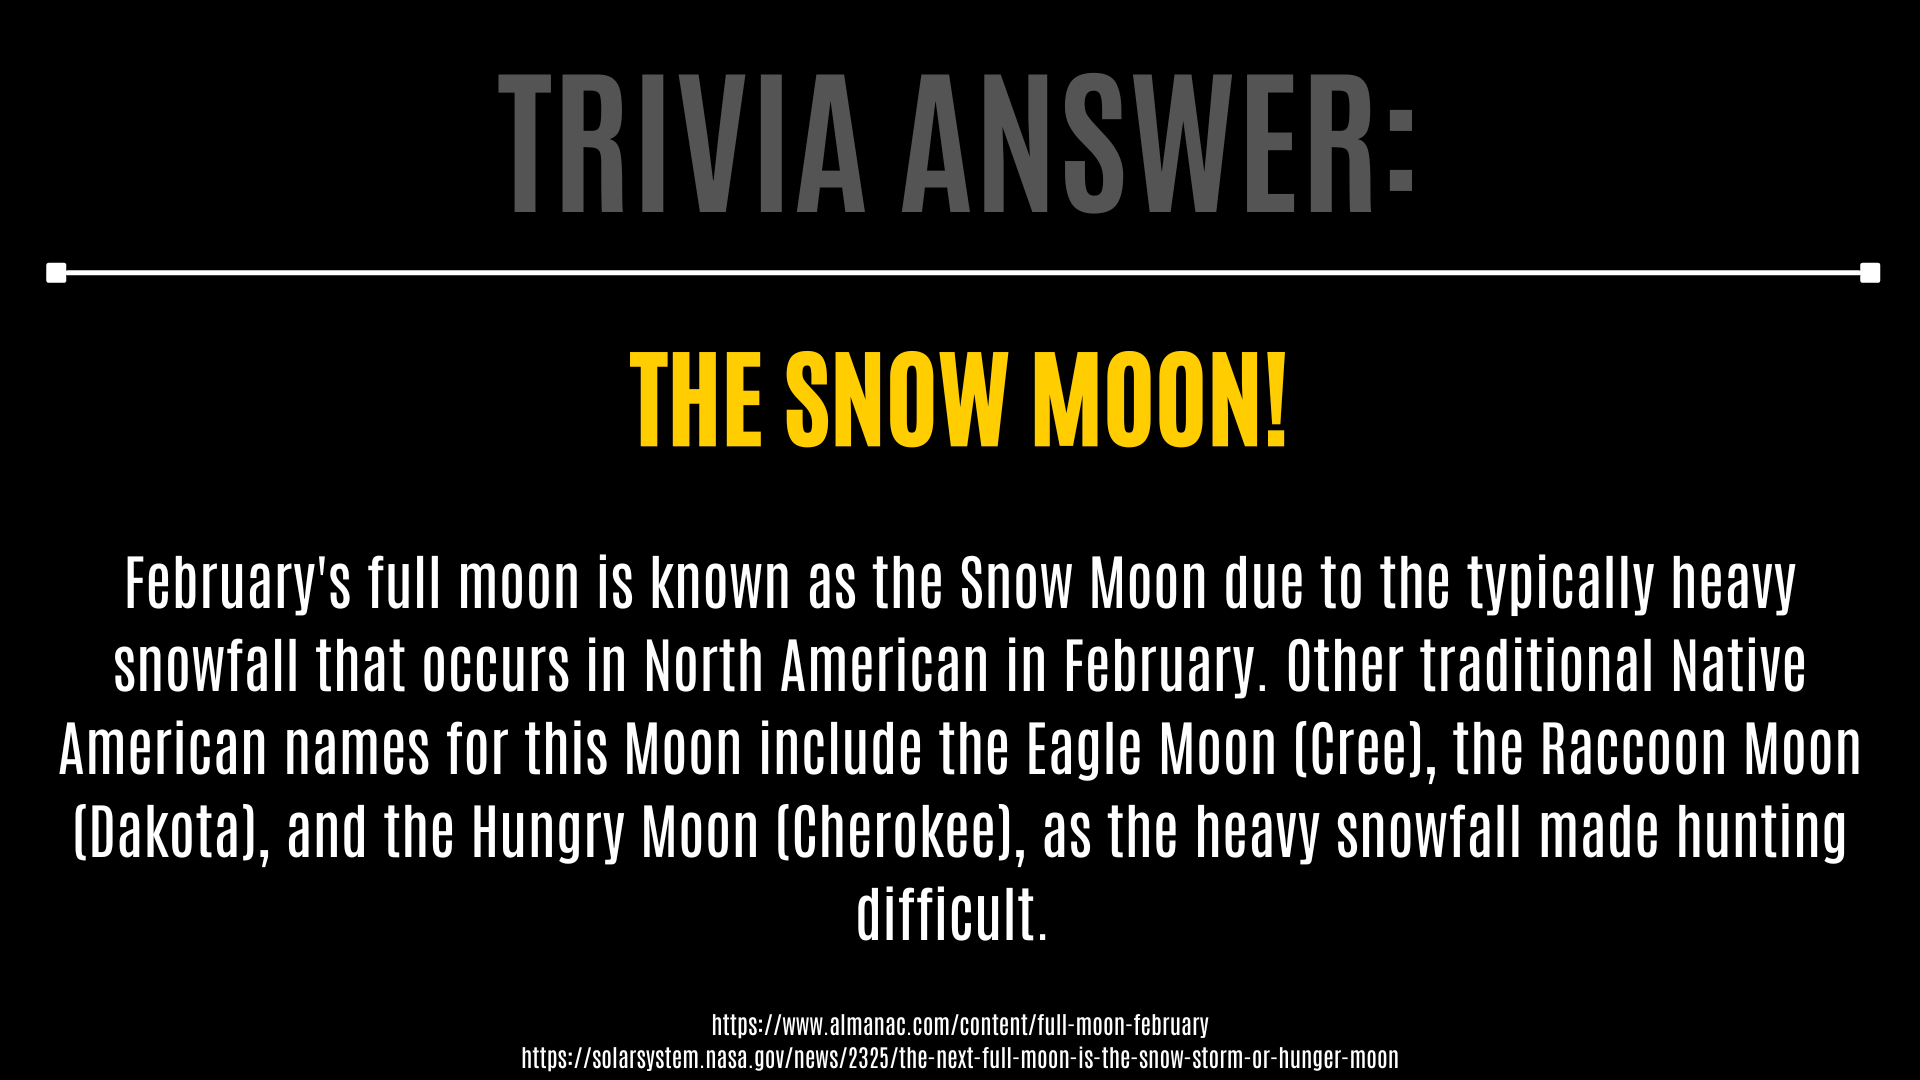 Trivia answer: THE SNOW MOON!  February's full moon is known as the Snow Moon due to the typically heavy snowfall that occurs in North American in February. Other traditional Native American names for this Moon include the Eagle Moon (Cree), the Raccoon Moon (Dakota), and the Hungry Moon (Cherokee), as the heavy snowfall made hunting difficult.